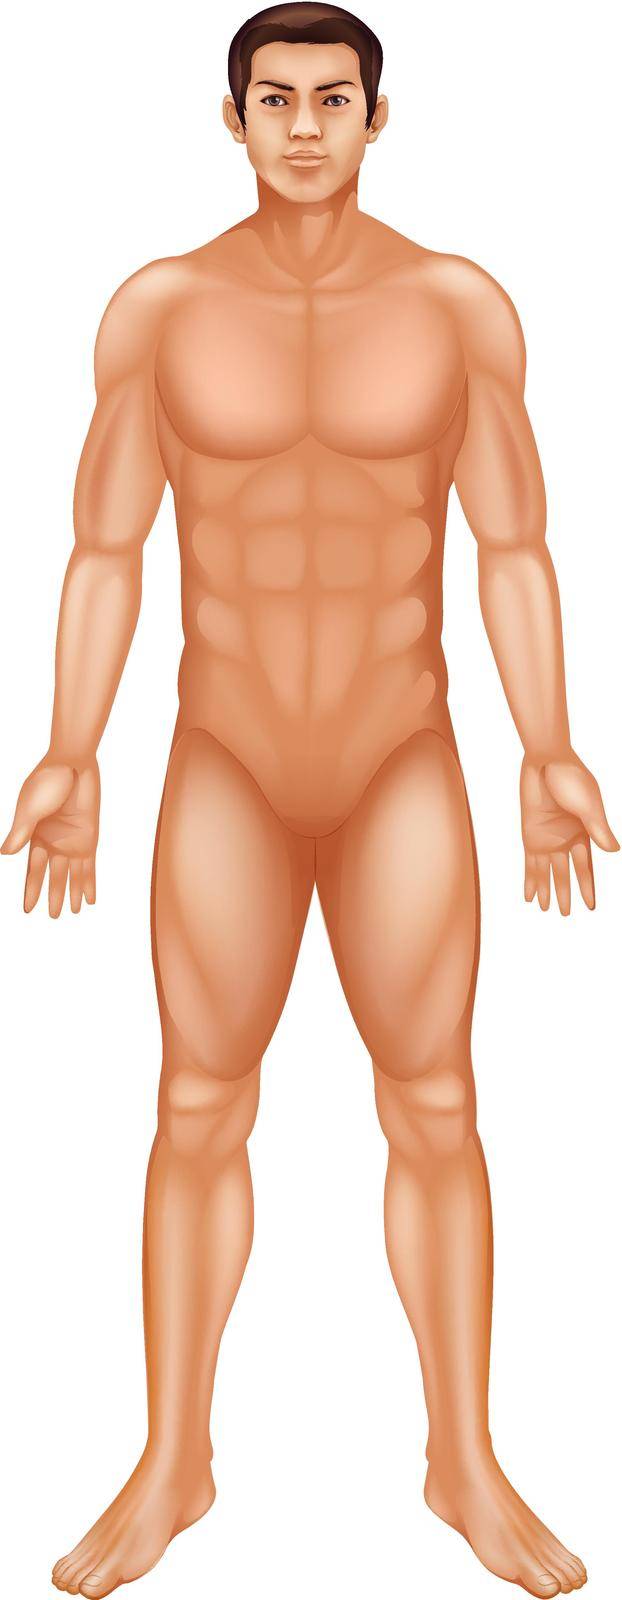 Male body by iimages